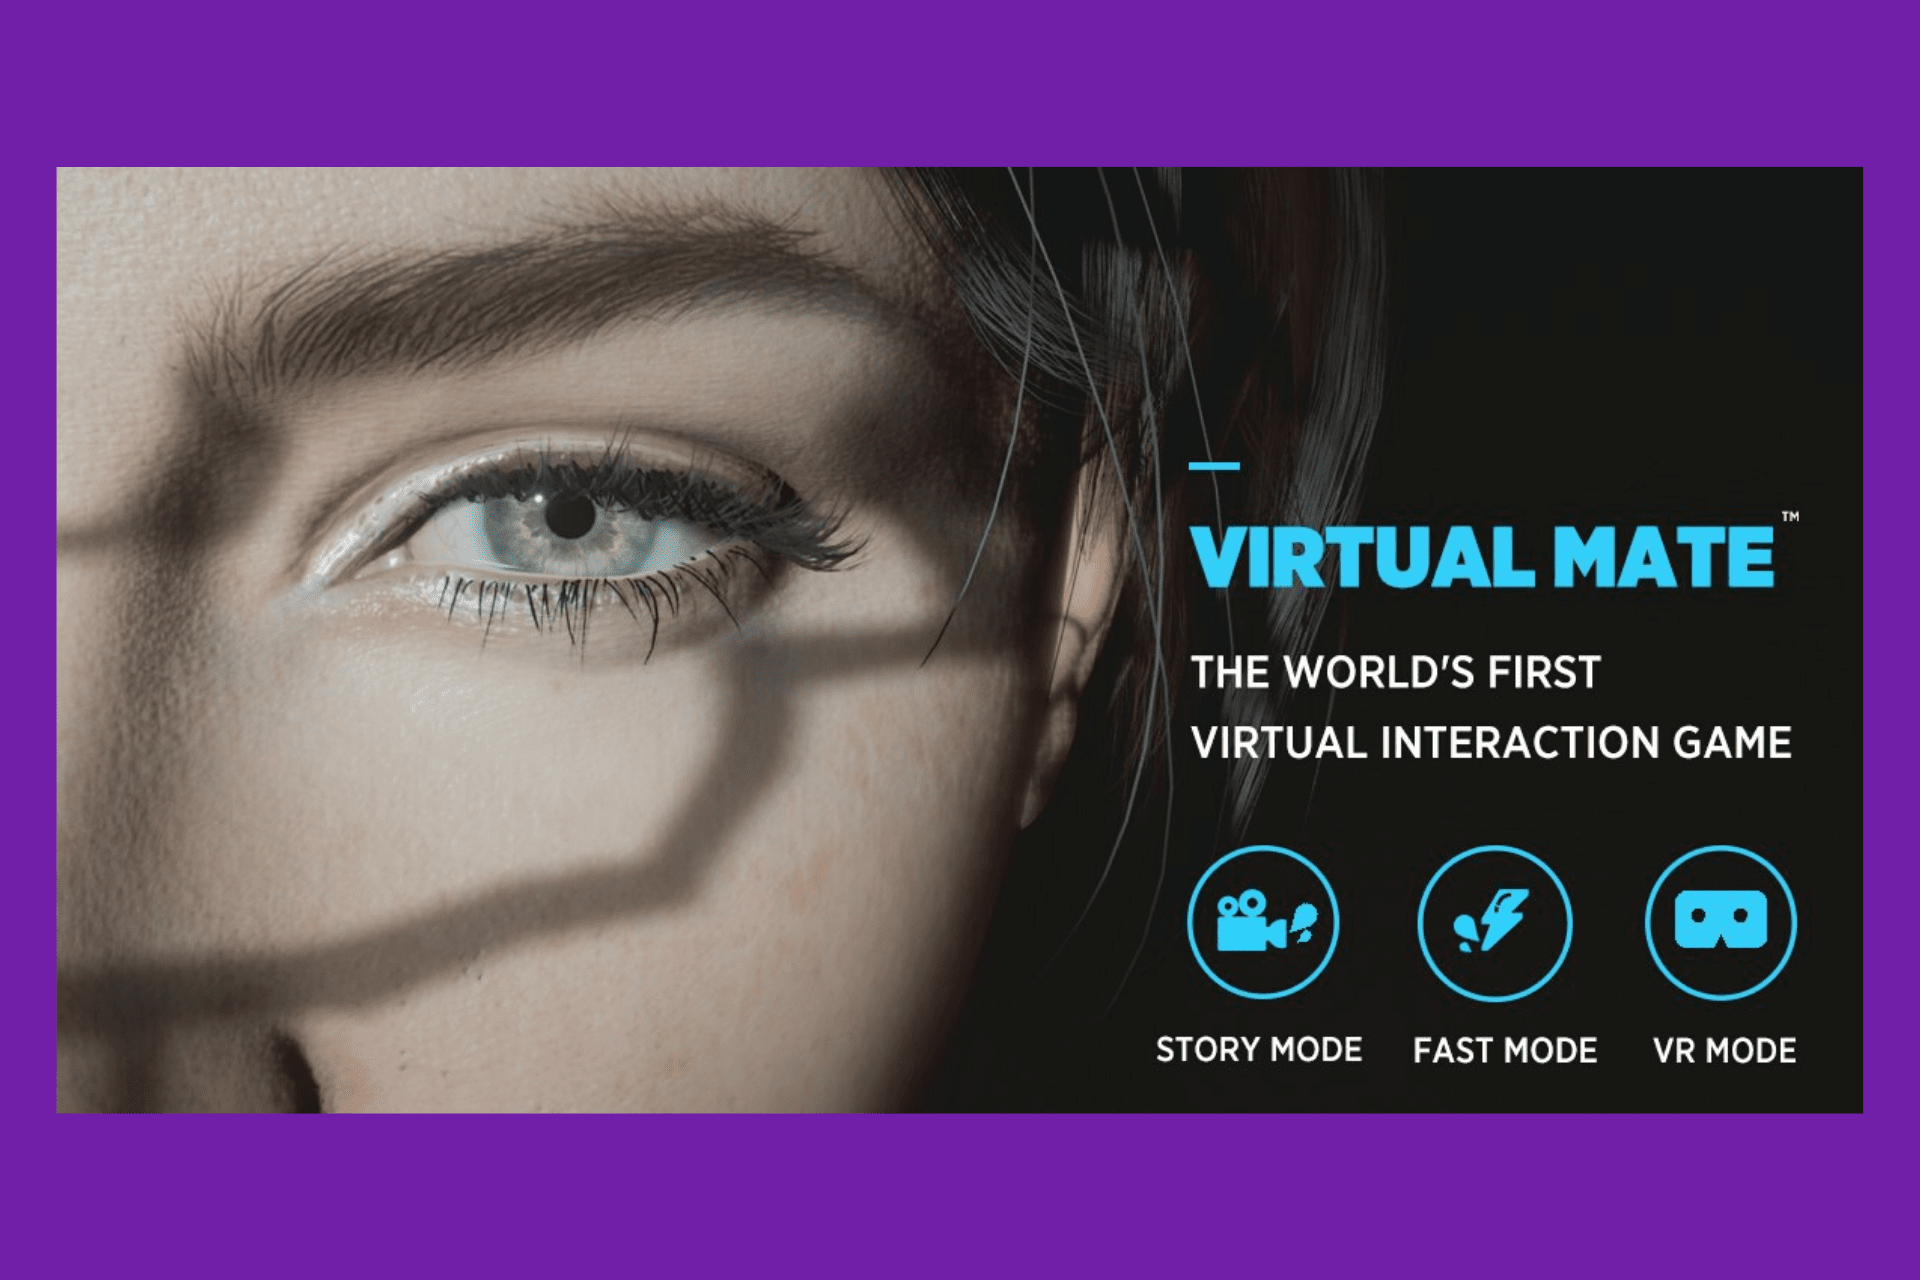 Virtual mate - the world's first interactive game available for sale.